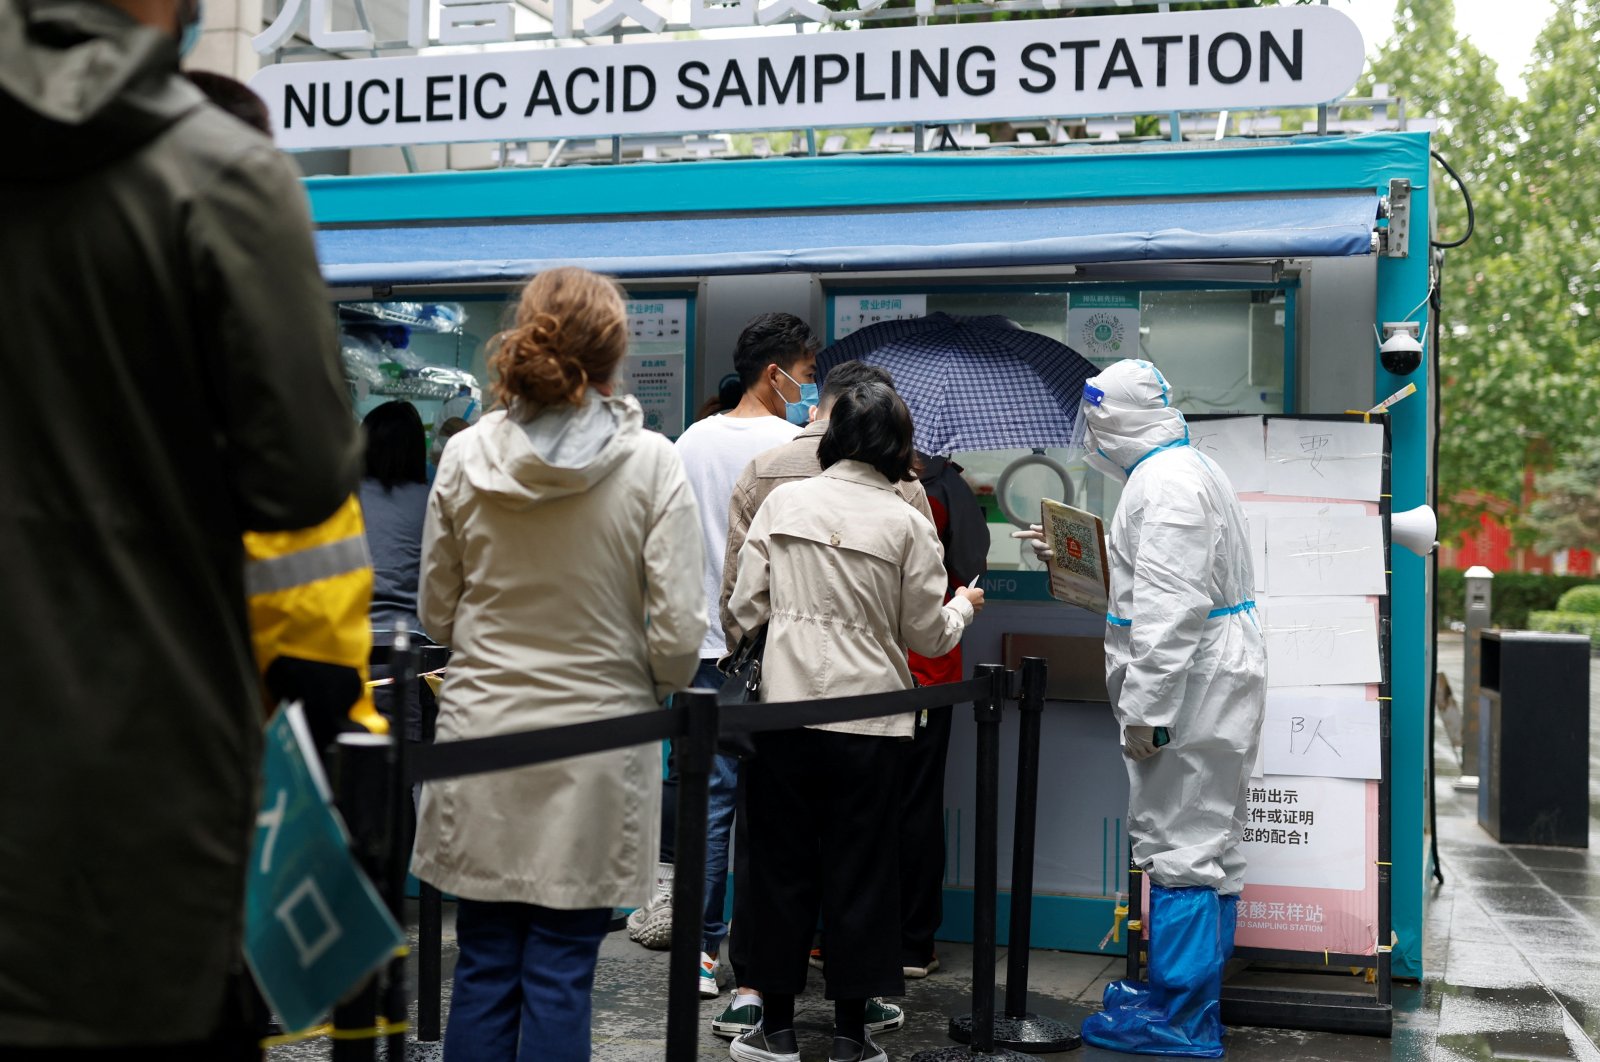 People line up to get tested next to a staff member wearing personal protective equipment (PPE) at a mobile nucleic acid testing site outside a shopping mall, amid the coronavirus disease (COVID-19) outbreak in Beijing, China, May 6, 2022. (Reuters Photo)